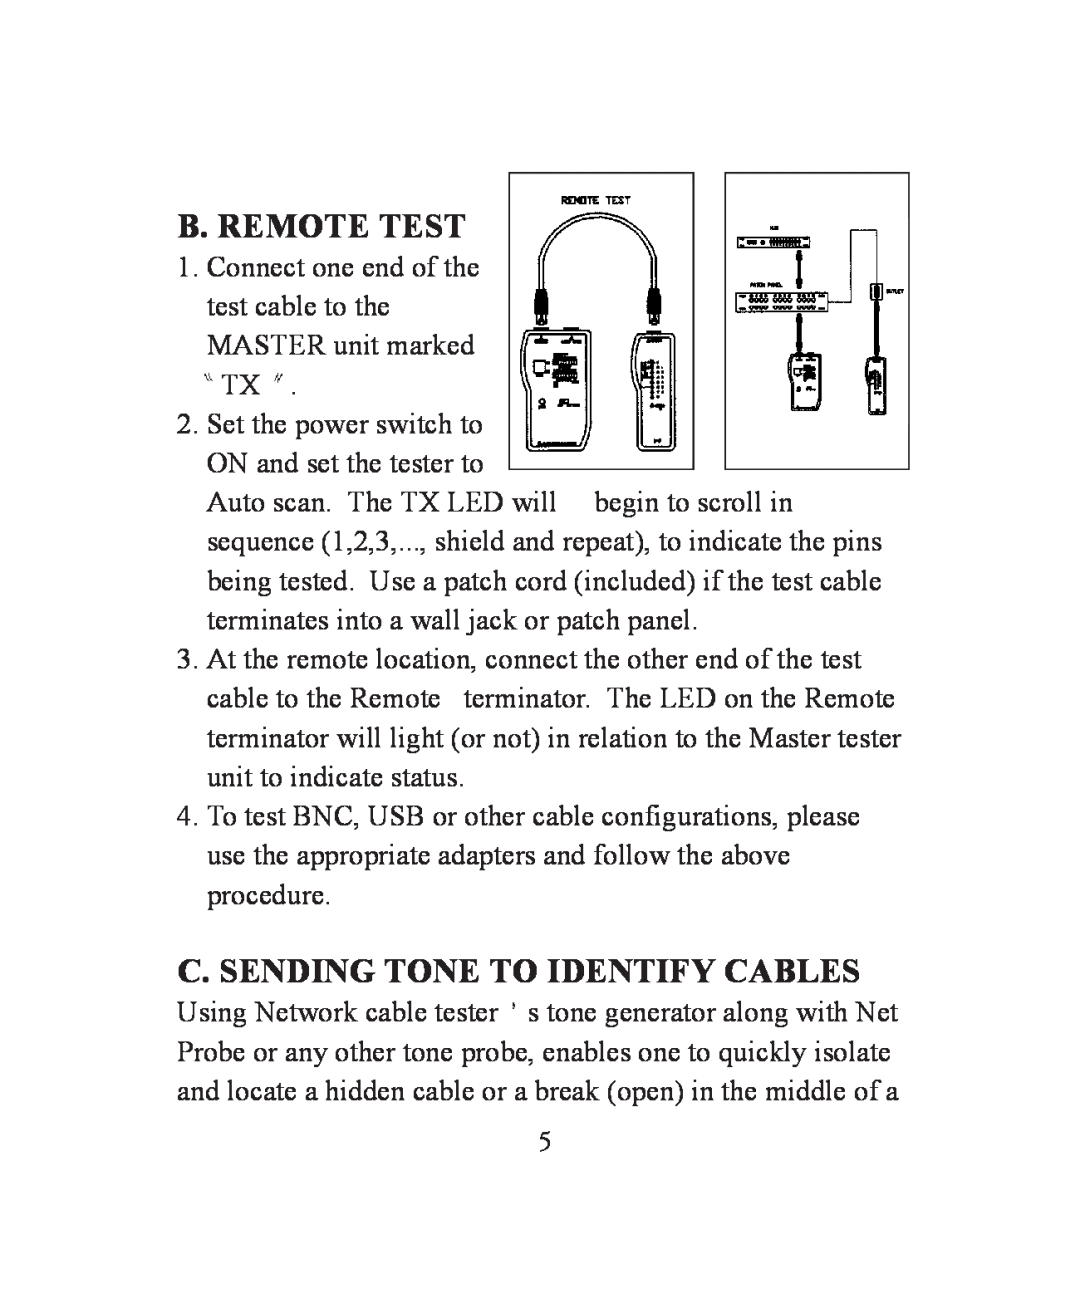 TRENDnet TC-NT2 instruction manual B. Remote Test, C. Sending Tone To Identify Cables 